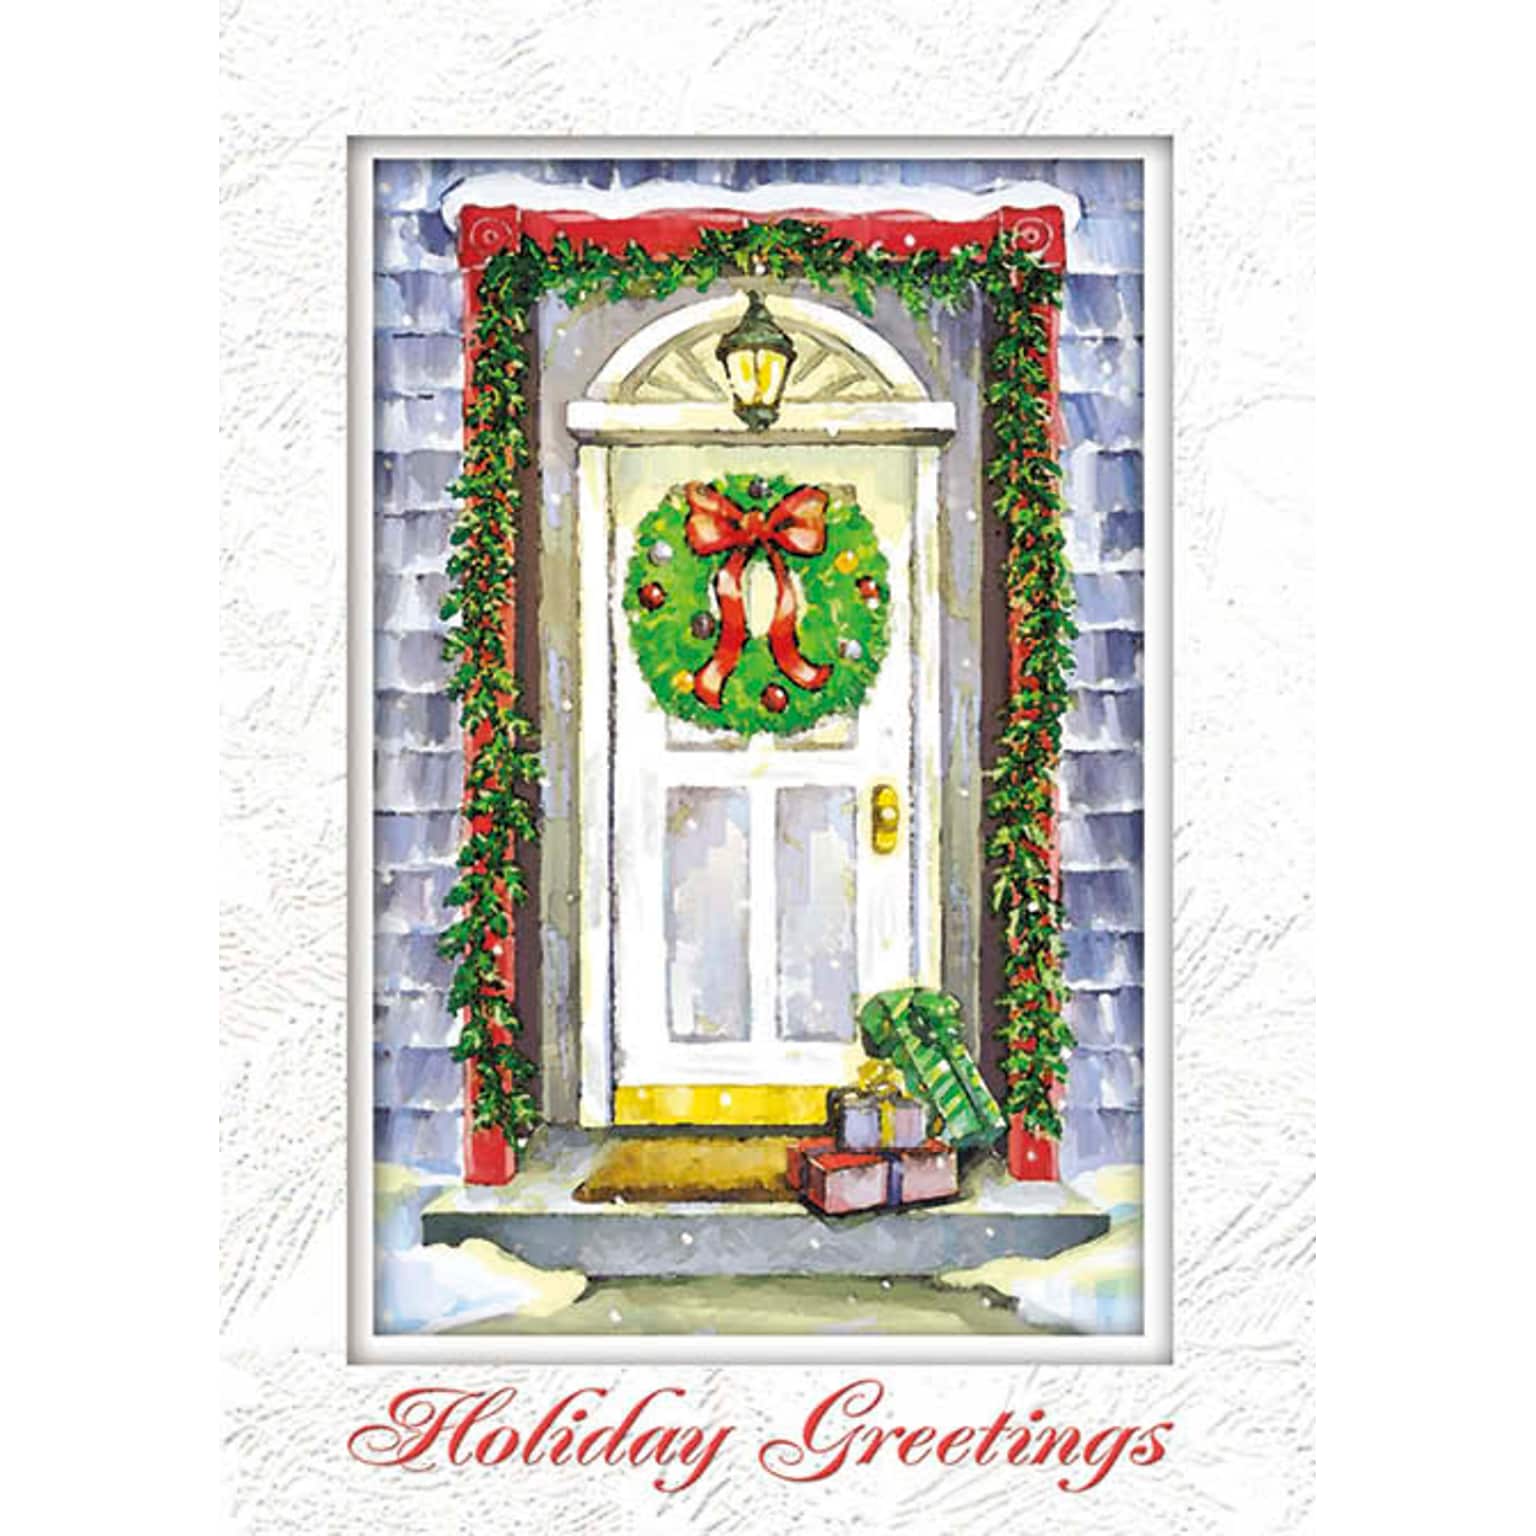 Holiday Greetings White Door With Wreath Seasonal Greeting Cards, With A7 Envelopes, 7 x 5, 25 Cards per Set